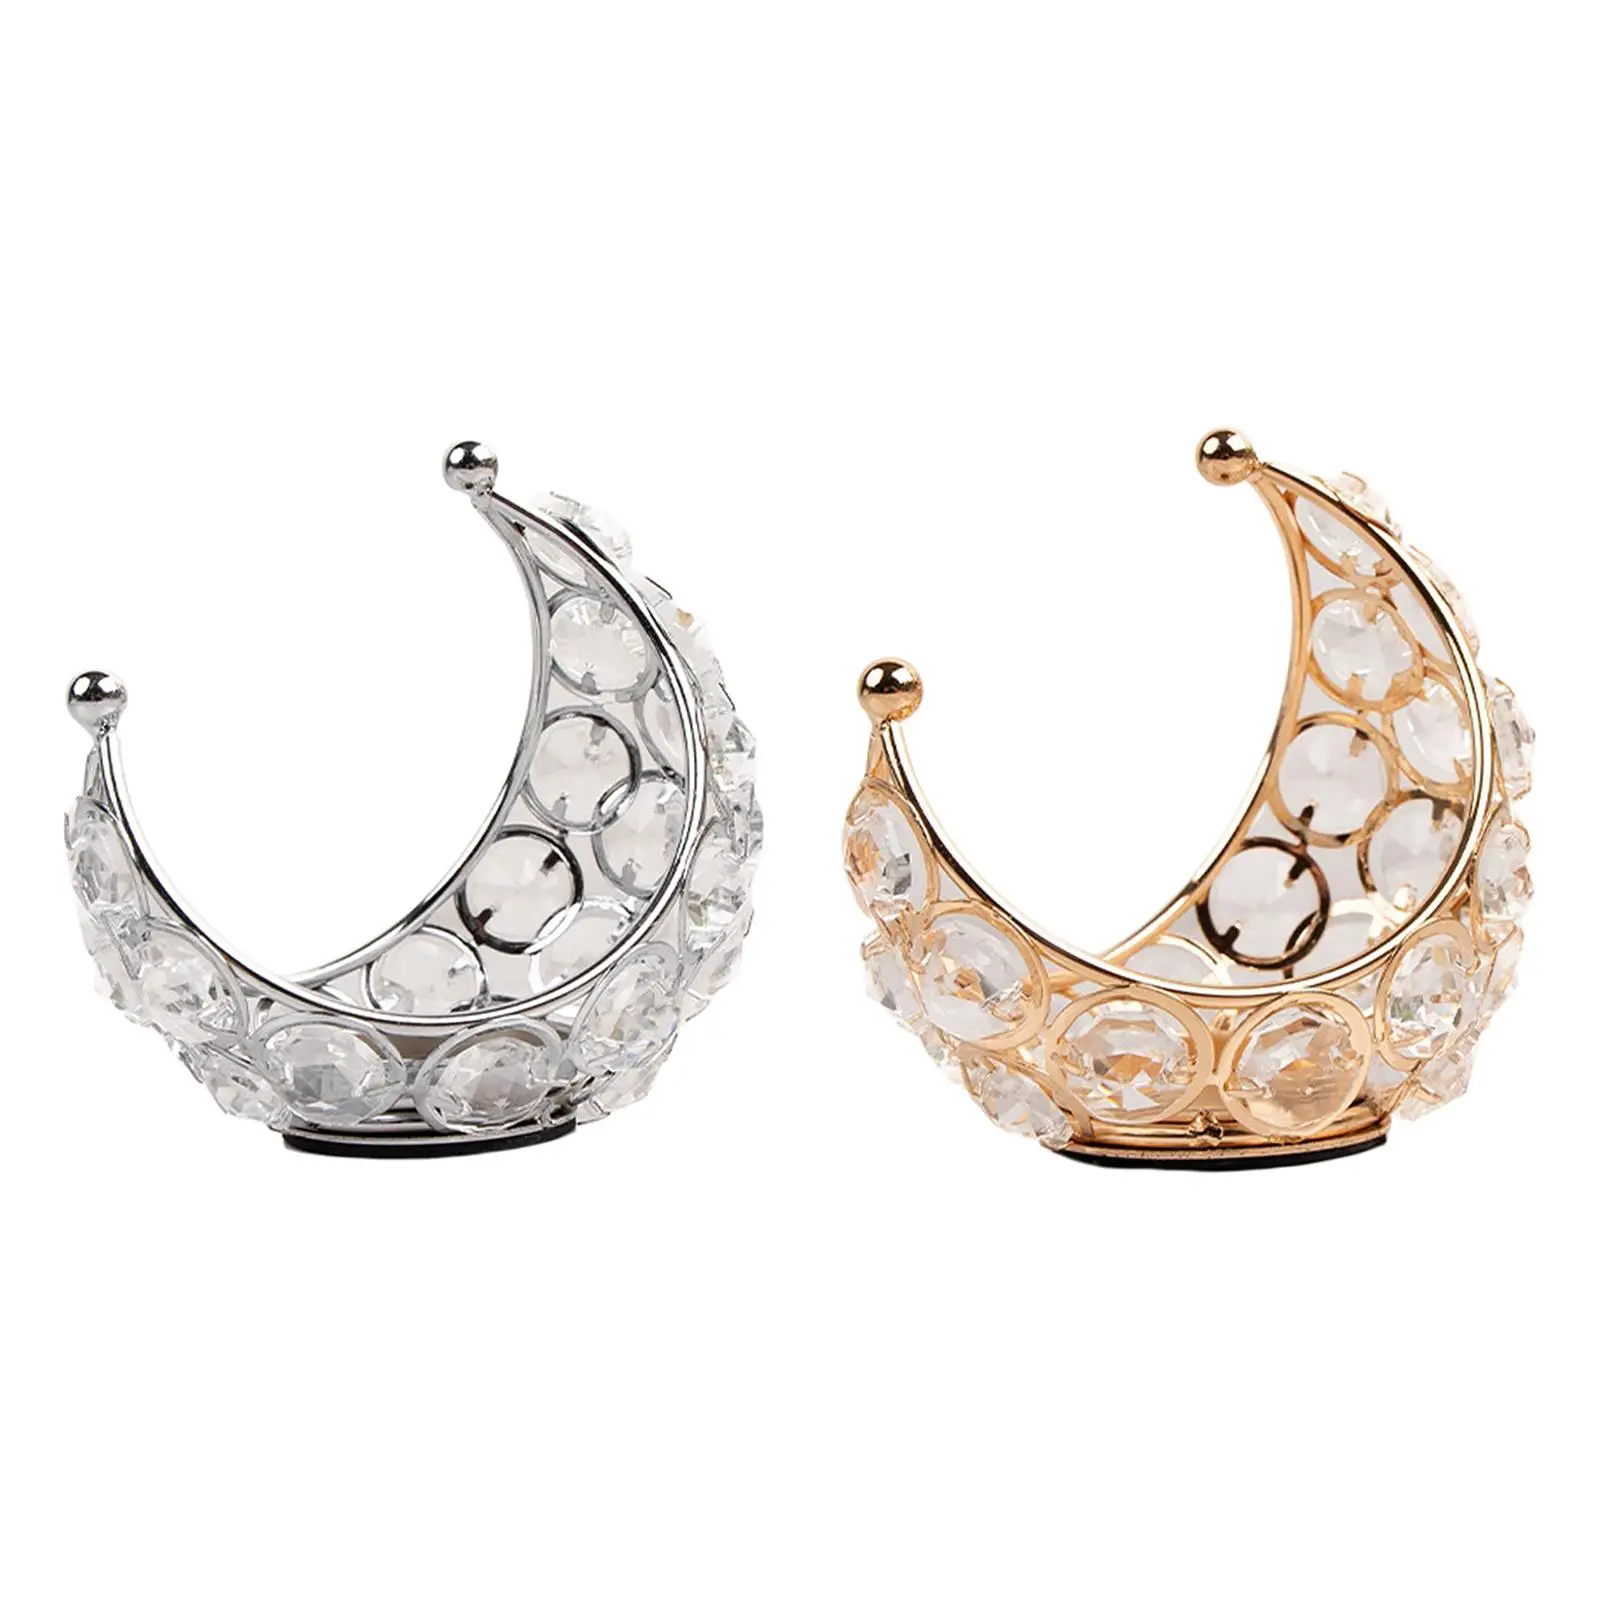 Moon Candle Holder Iron Candlestick Elegant Tealight Candle Holder Candle Stand for Christmas Dining Table Desktop Bedroom Decor